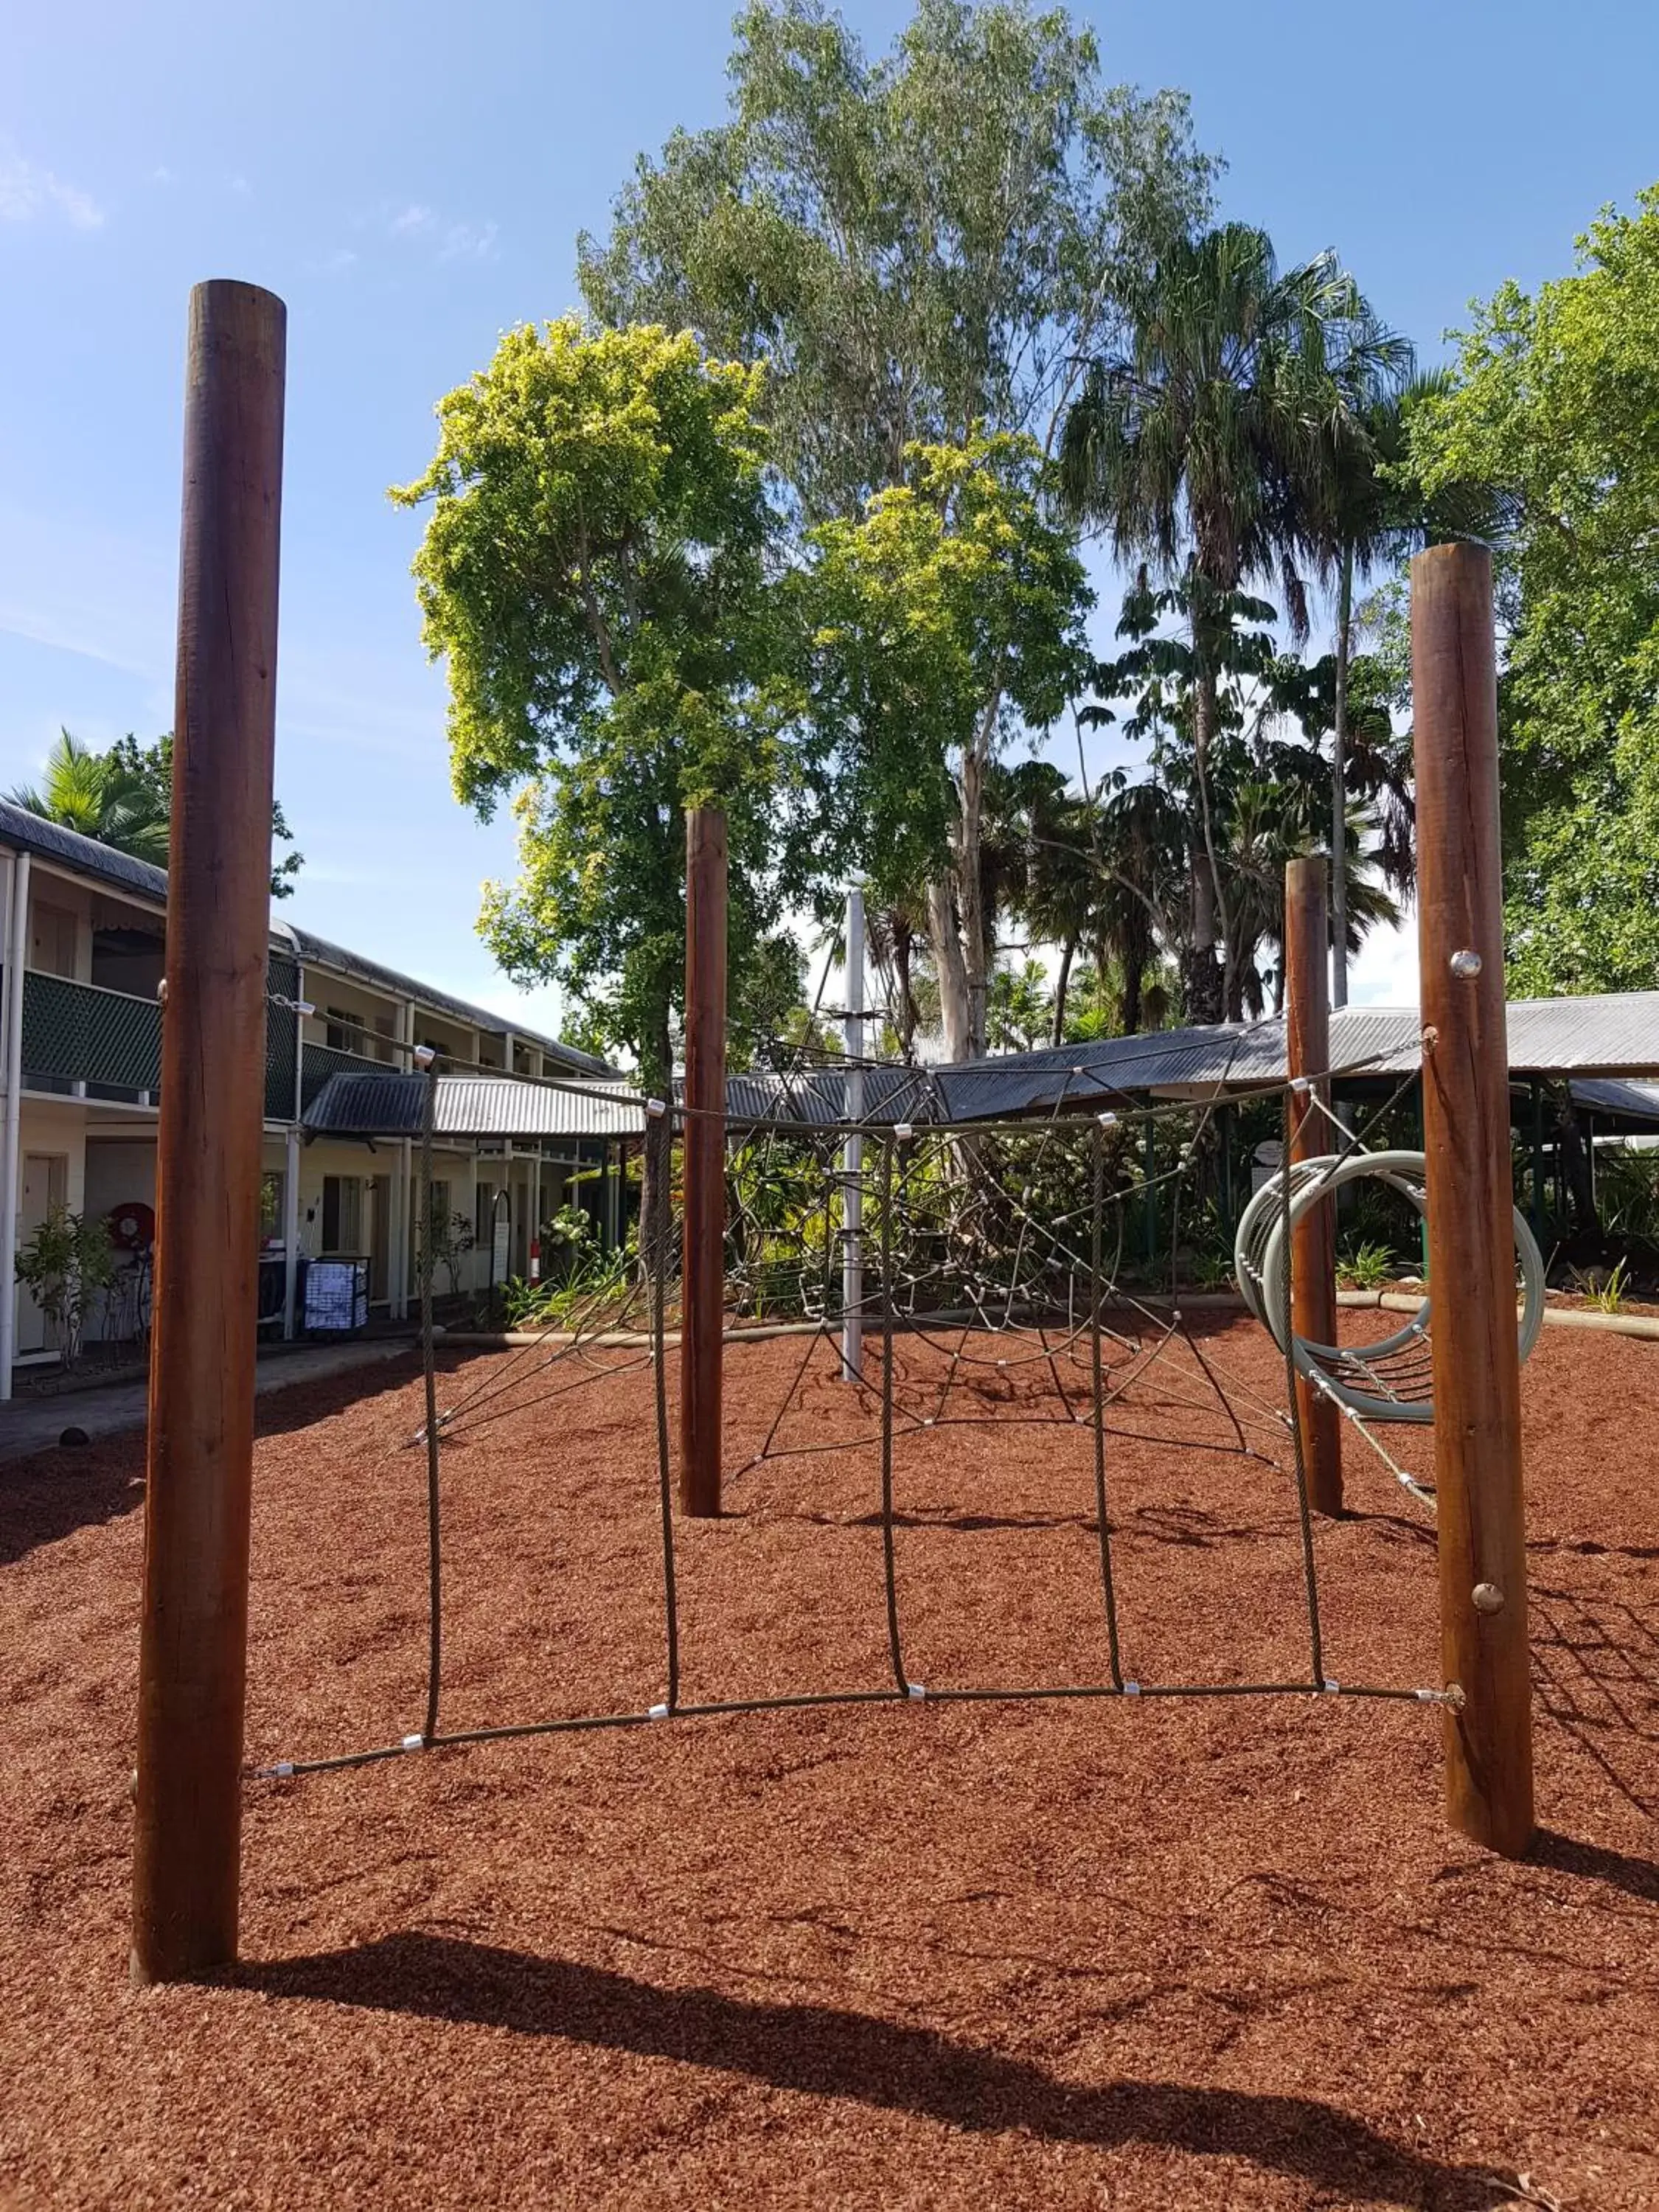 Children play ground, Children's Play Area in Cairns Colonial Club Resort